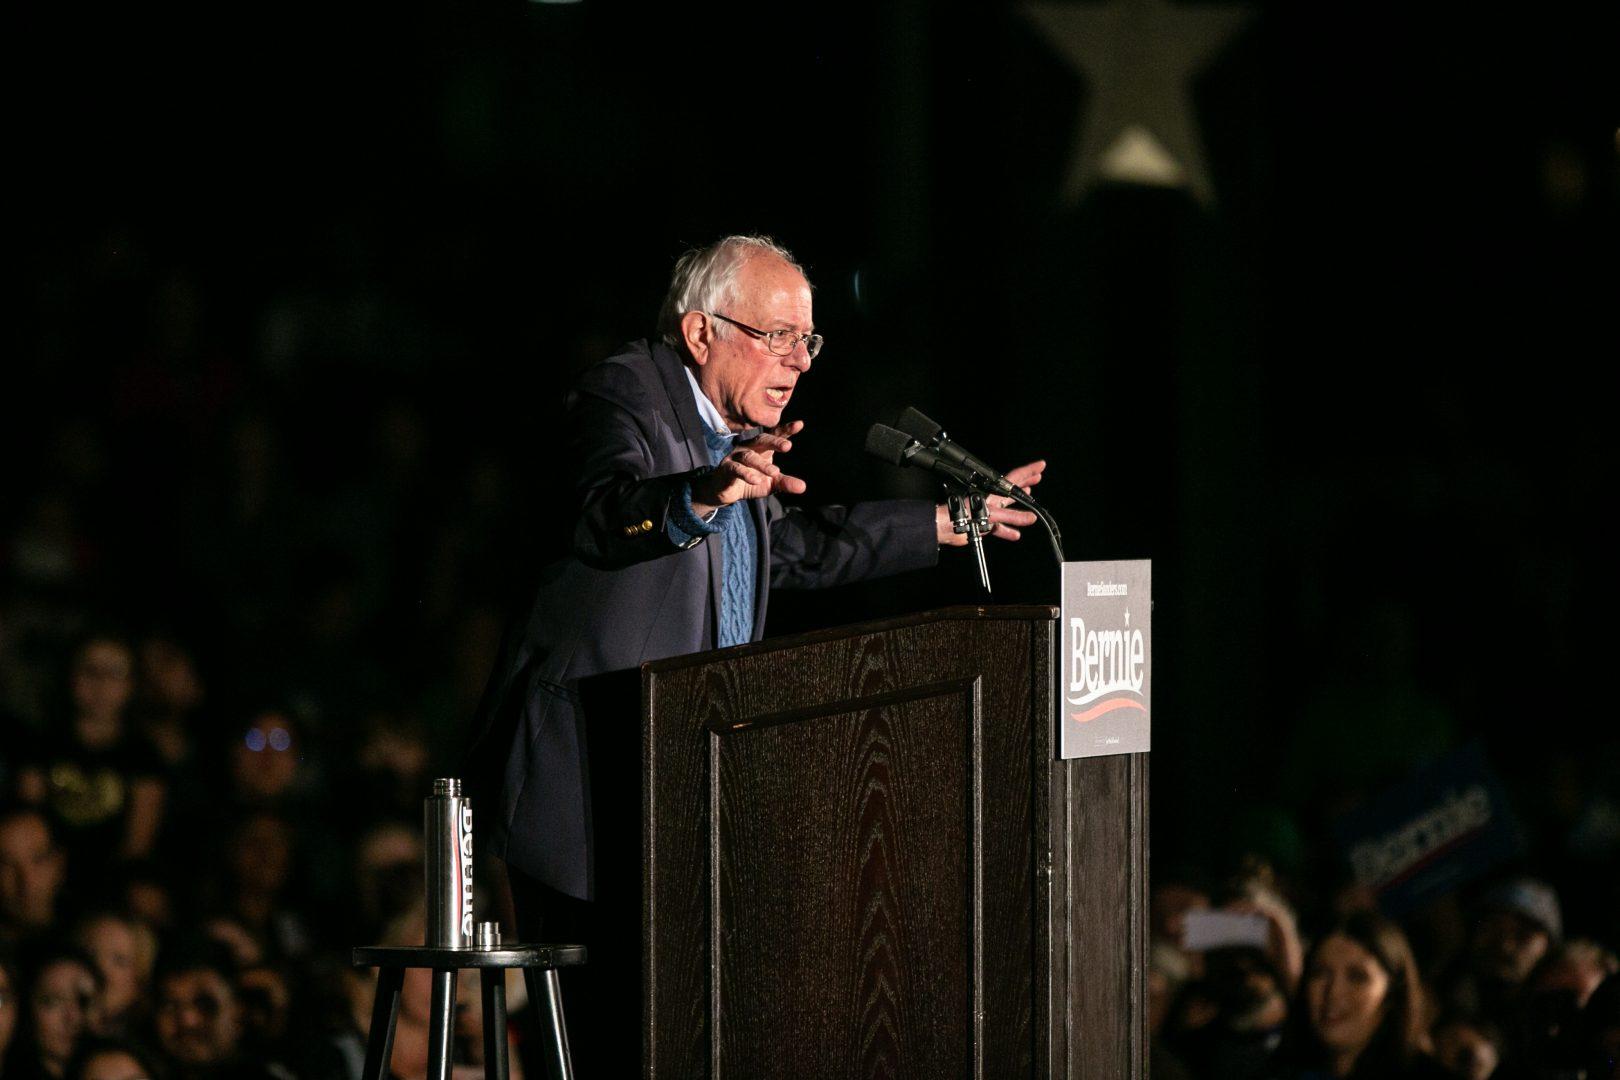 Presidential+hopeful+Bernie+Sanders+speaks+in+front+of+a+crowd+at+the+Veterans+Peace+Memorial+Lawn+at+Fresno+City+College+on+Friday%2C+November+15%2C+2019.+%28Larry+Valenzuela%2FThe+Collegian%29